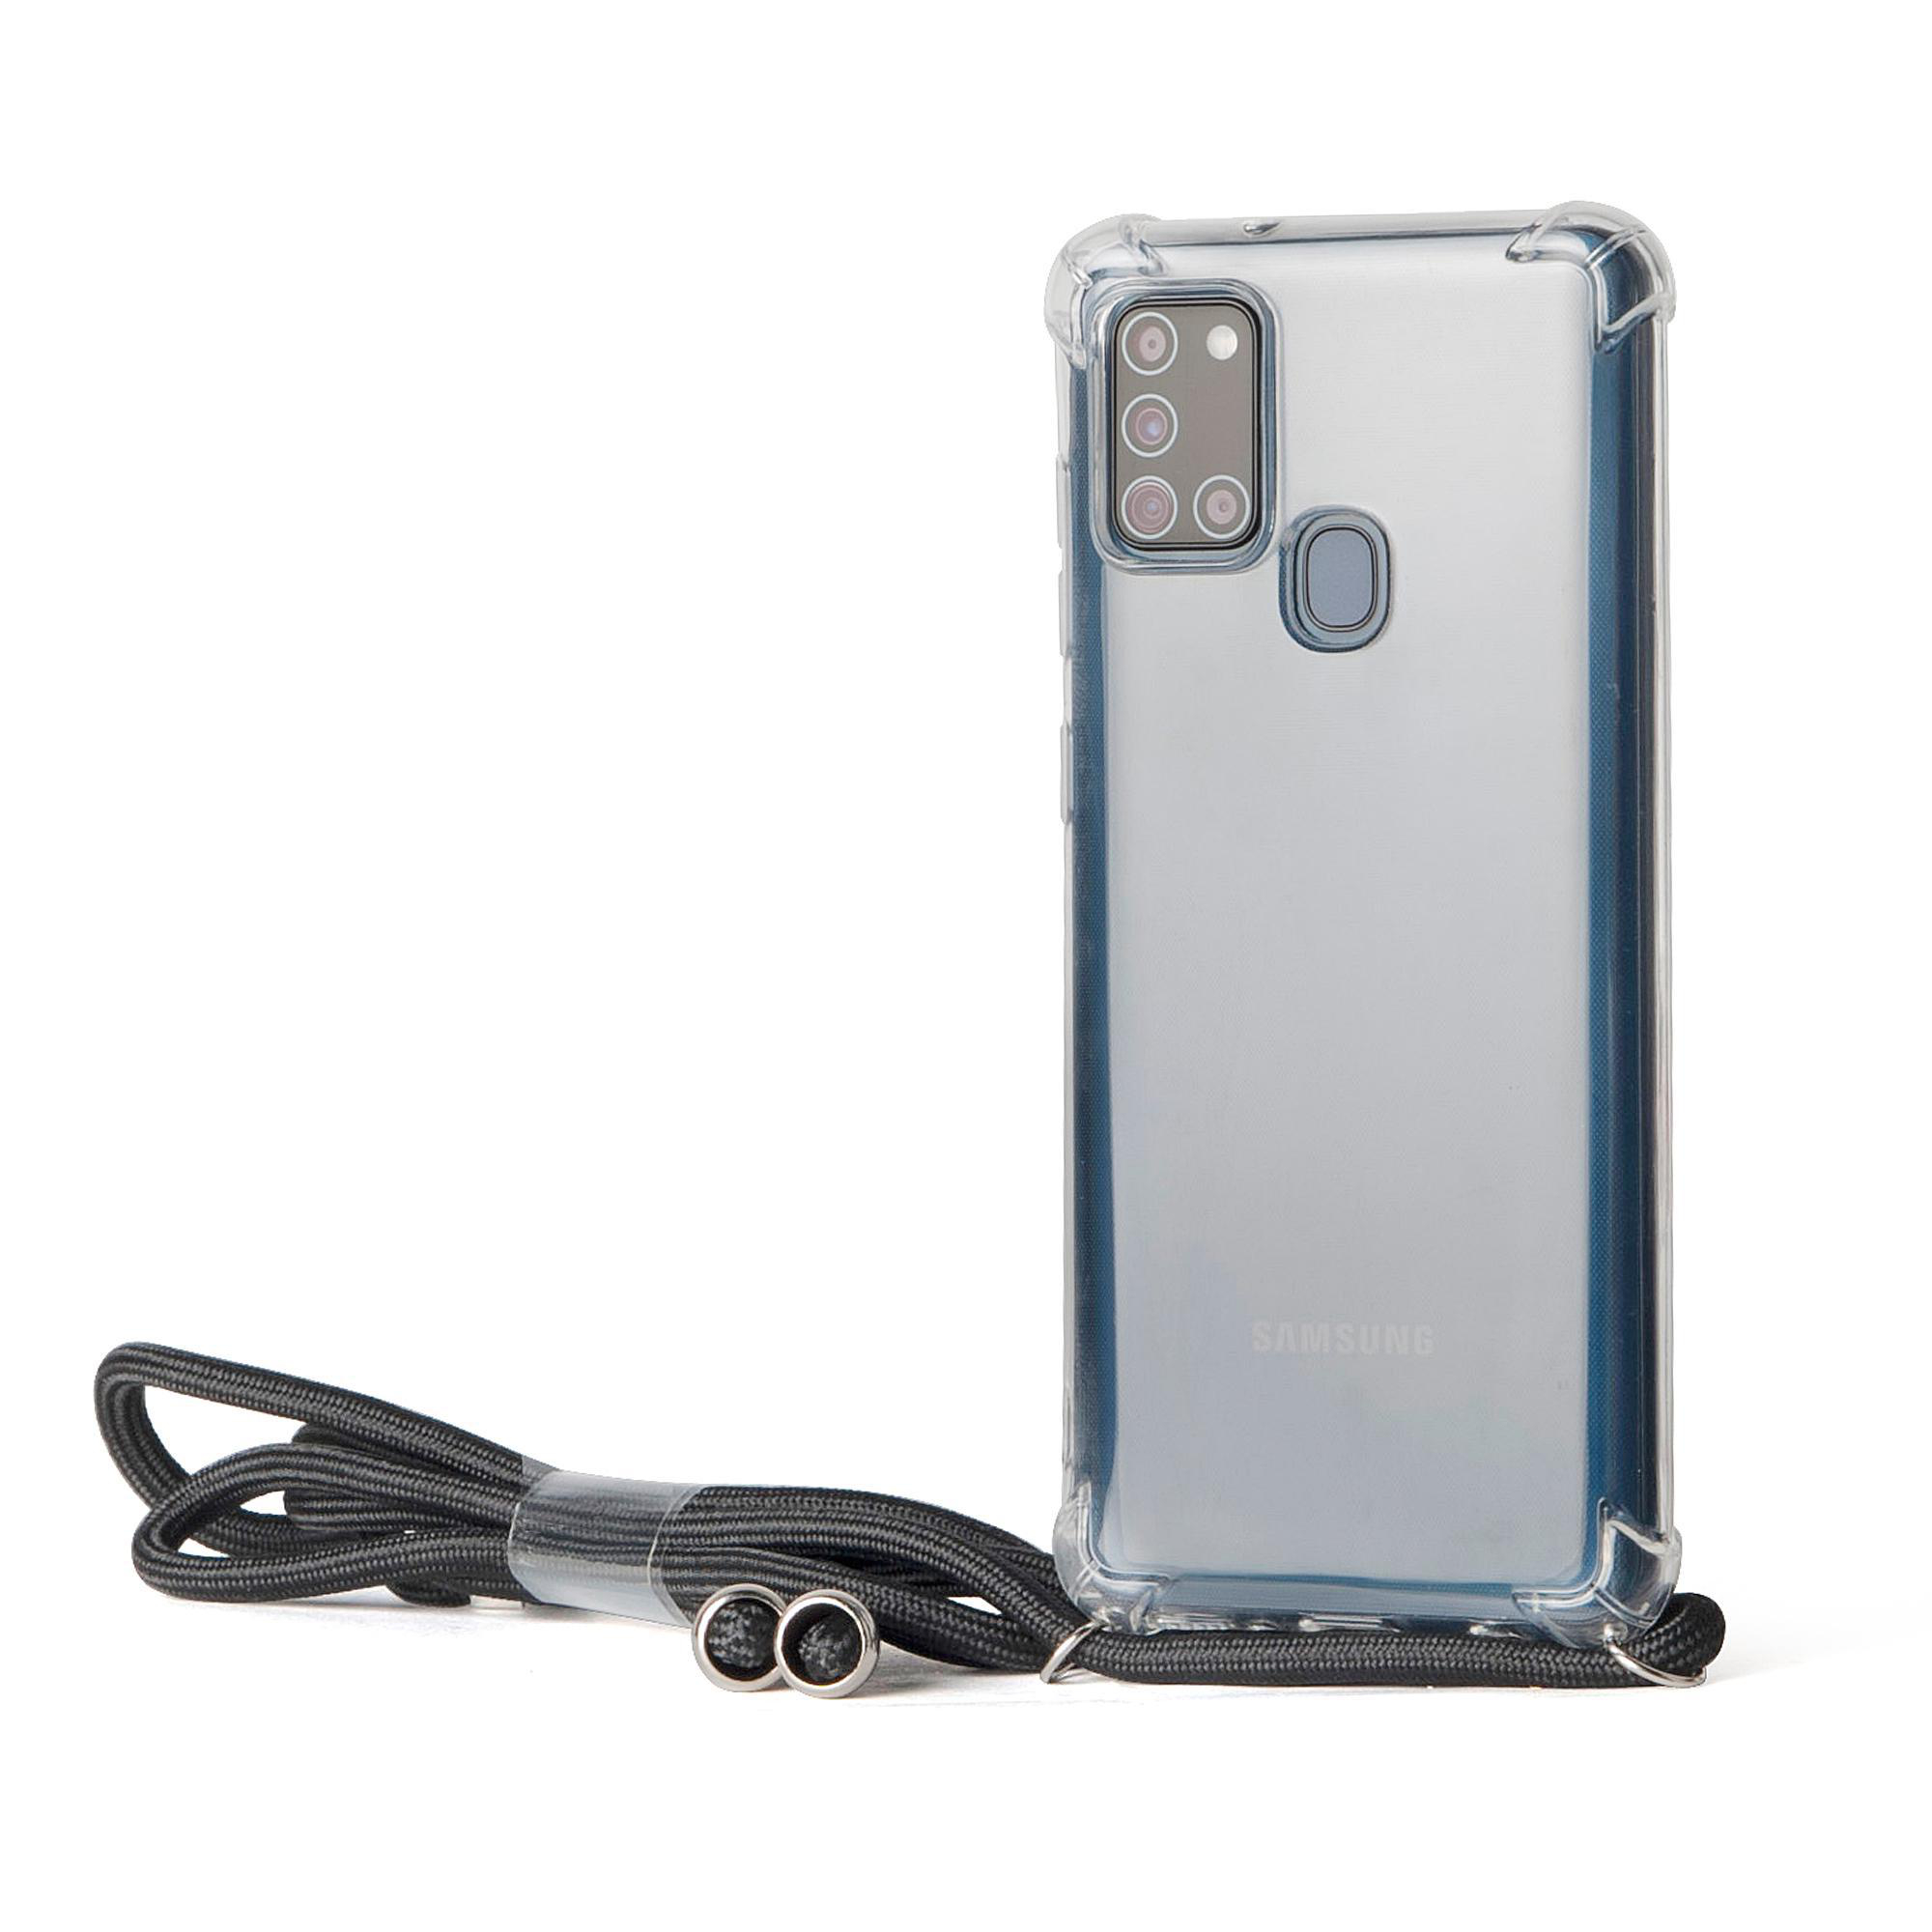 Samsung, ISY Backcover, A21S, ISC-5302, Transparent Galaxy